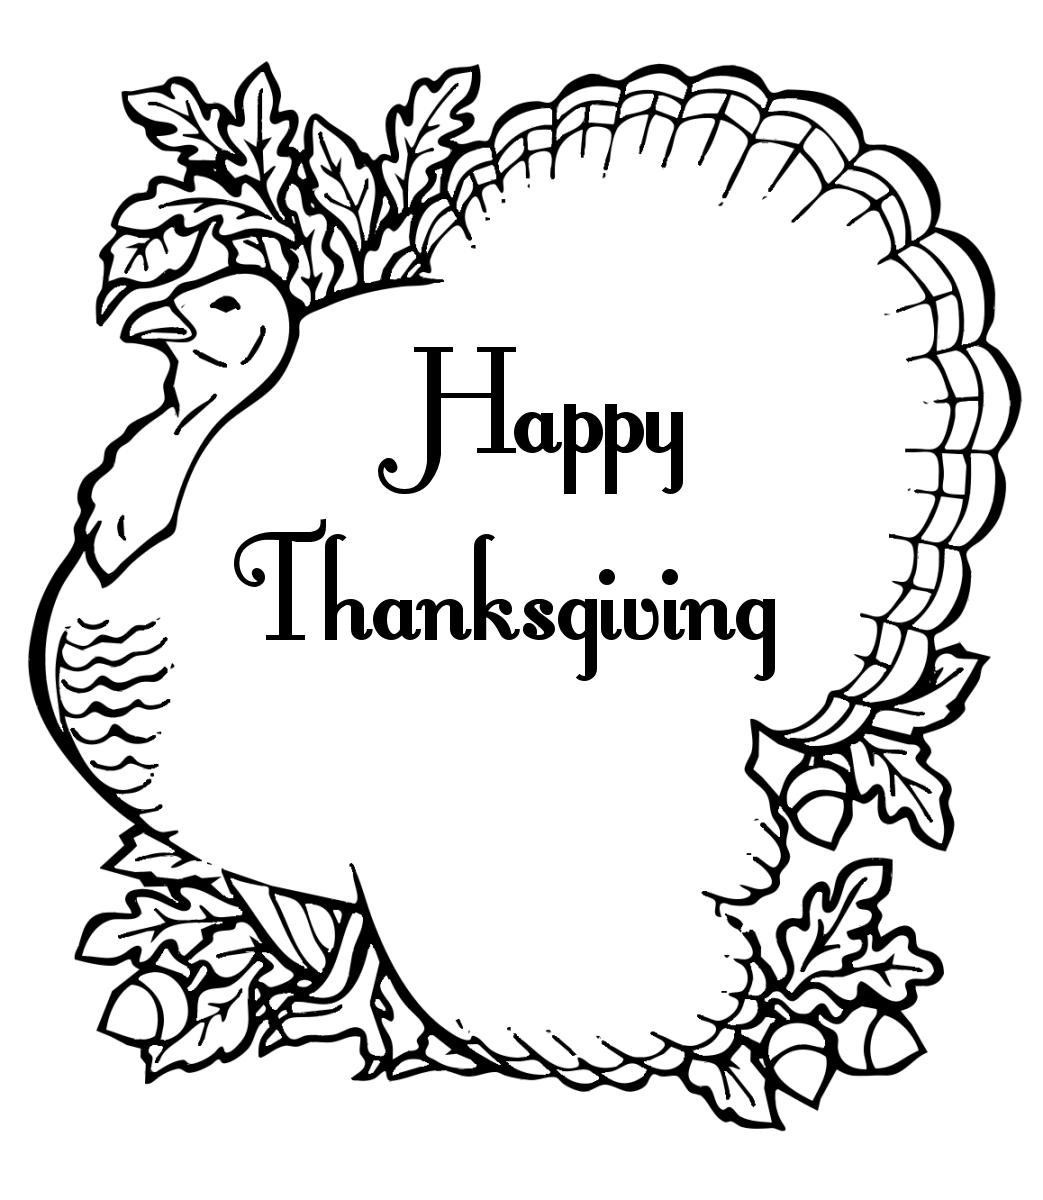 Free Thanksgiving Clipart. Search Terms: black and white ...